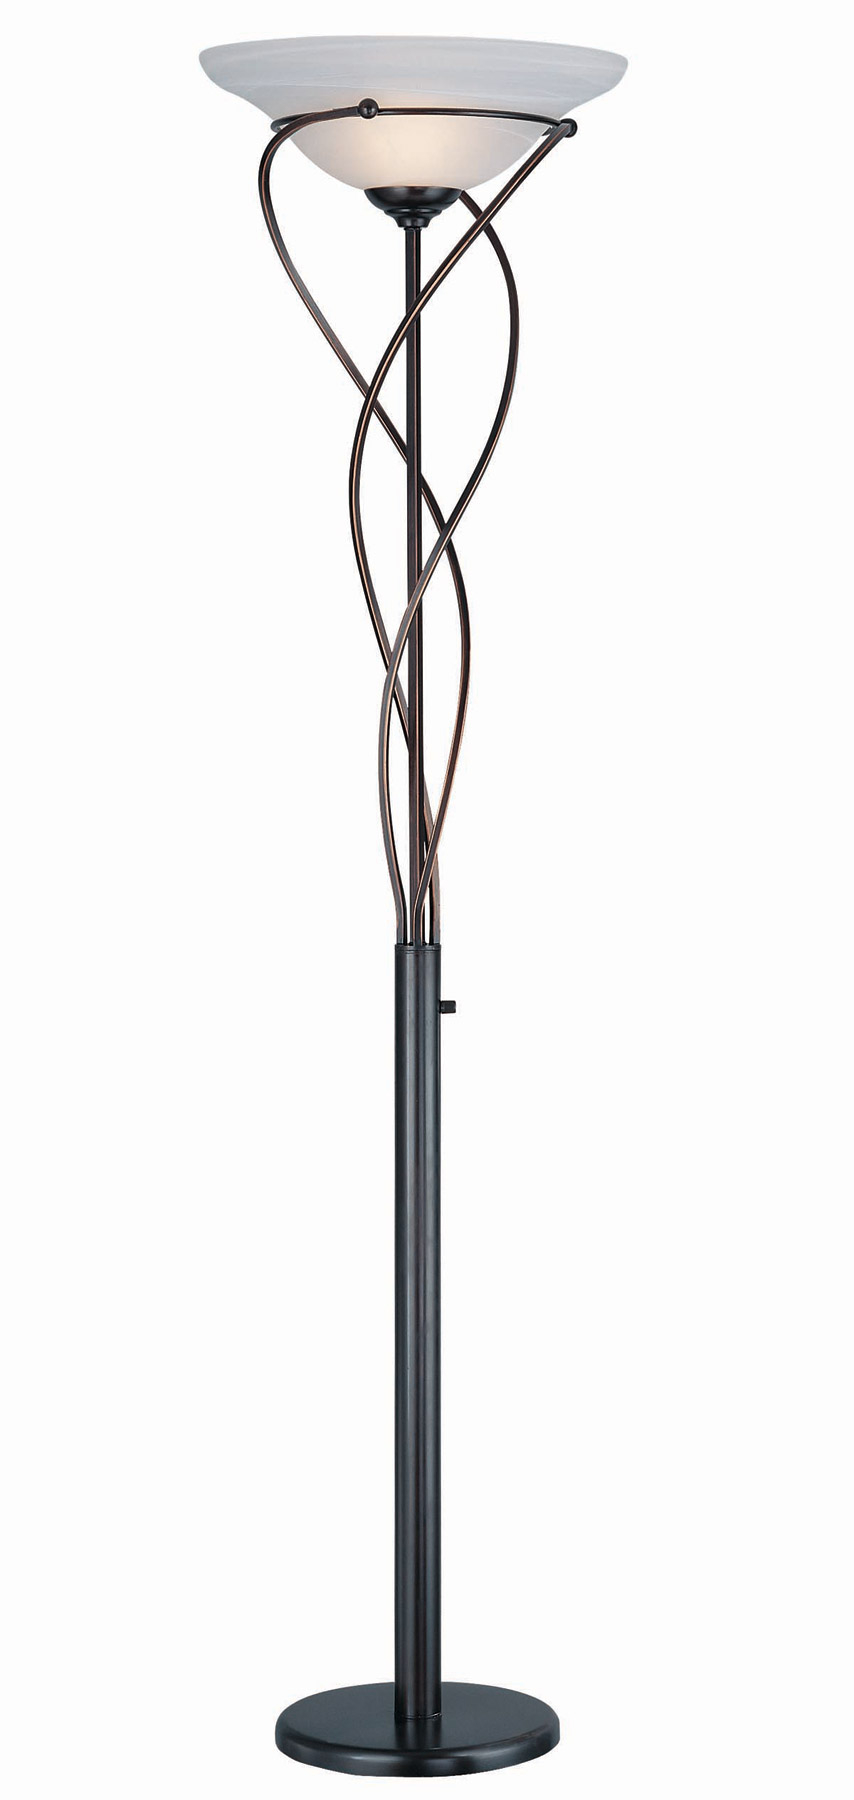 Lite Source Ls 9640dbrz Majesty Torchiere Floor Lamp inside sizing 854 X 1800